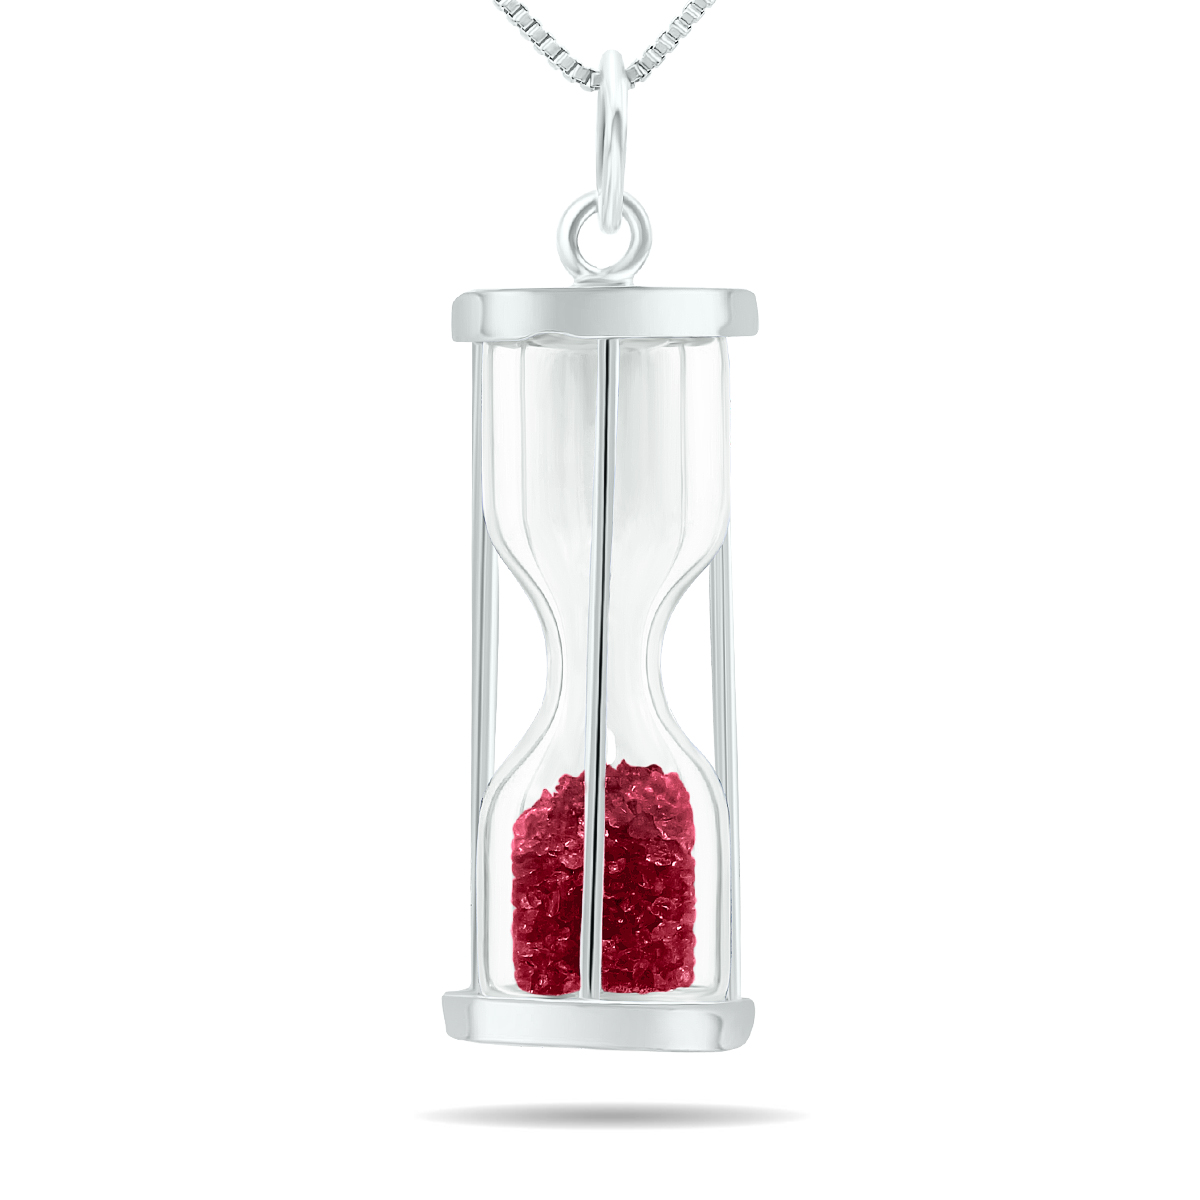 3/4 Carat TW Genuine July Ruby birthstone Hourglass Pendant Necklace - Tooth Fairy Pixie Dust Gift 925 Sterling Silver